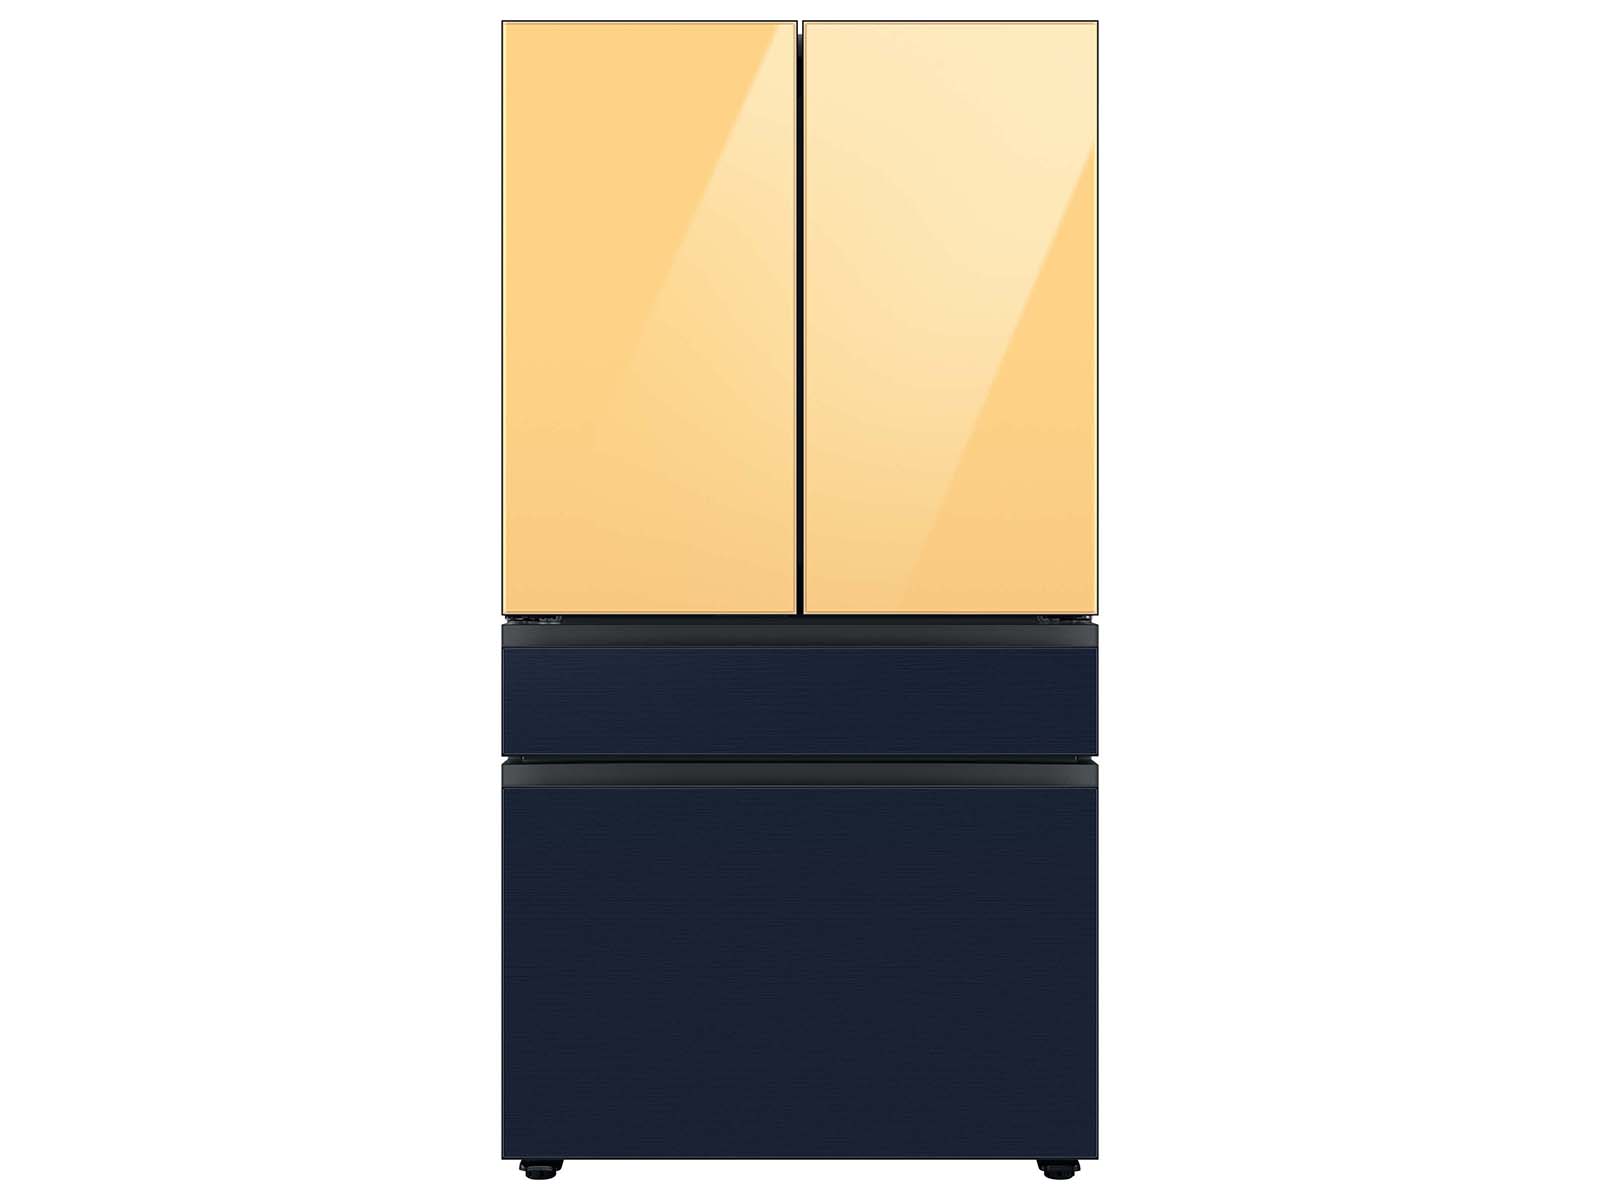 Samsung Bespoke 4-Door French Door Refrigerator (29 cu. ft.) with Customizable Door Panel Colors and Beverage Center™ in Sunrise Yellow Glass Top in White Glass Middle, and Morning Blue Glass Bottom Panels